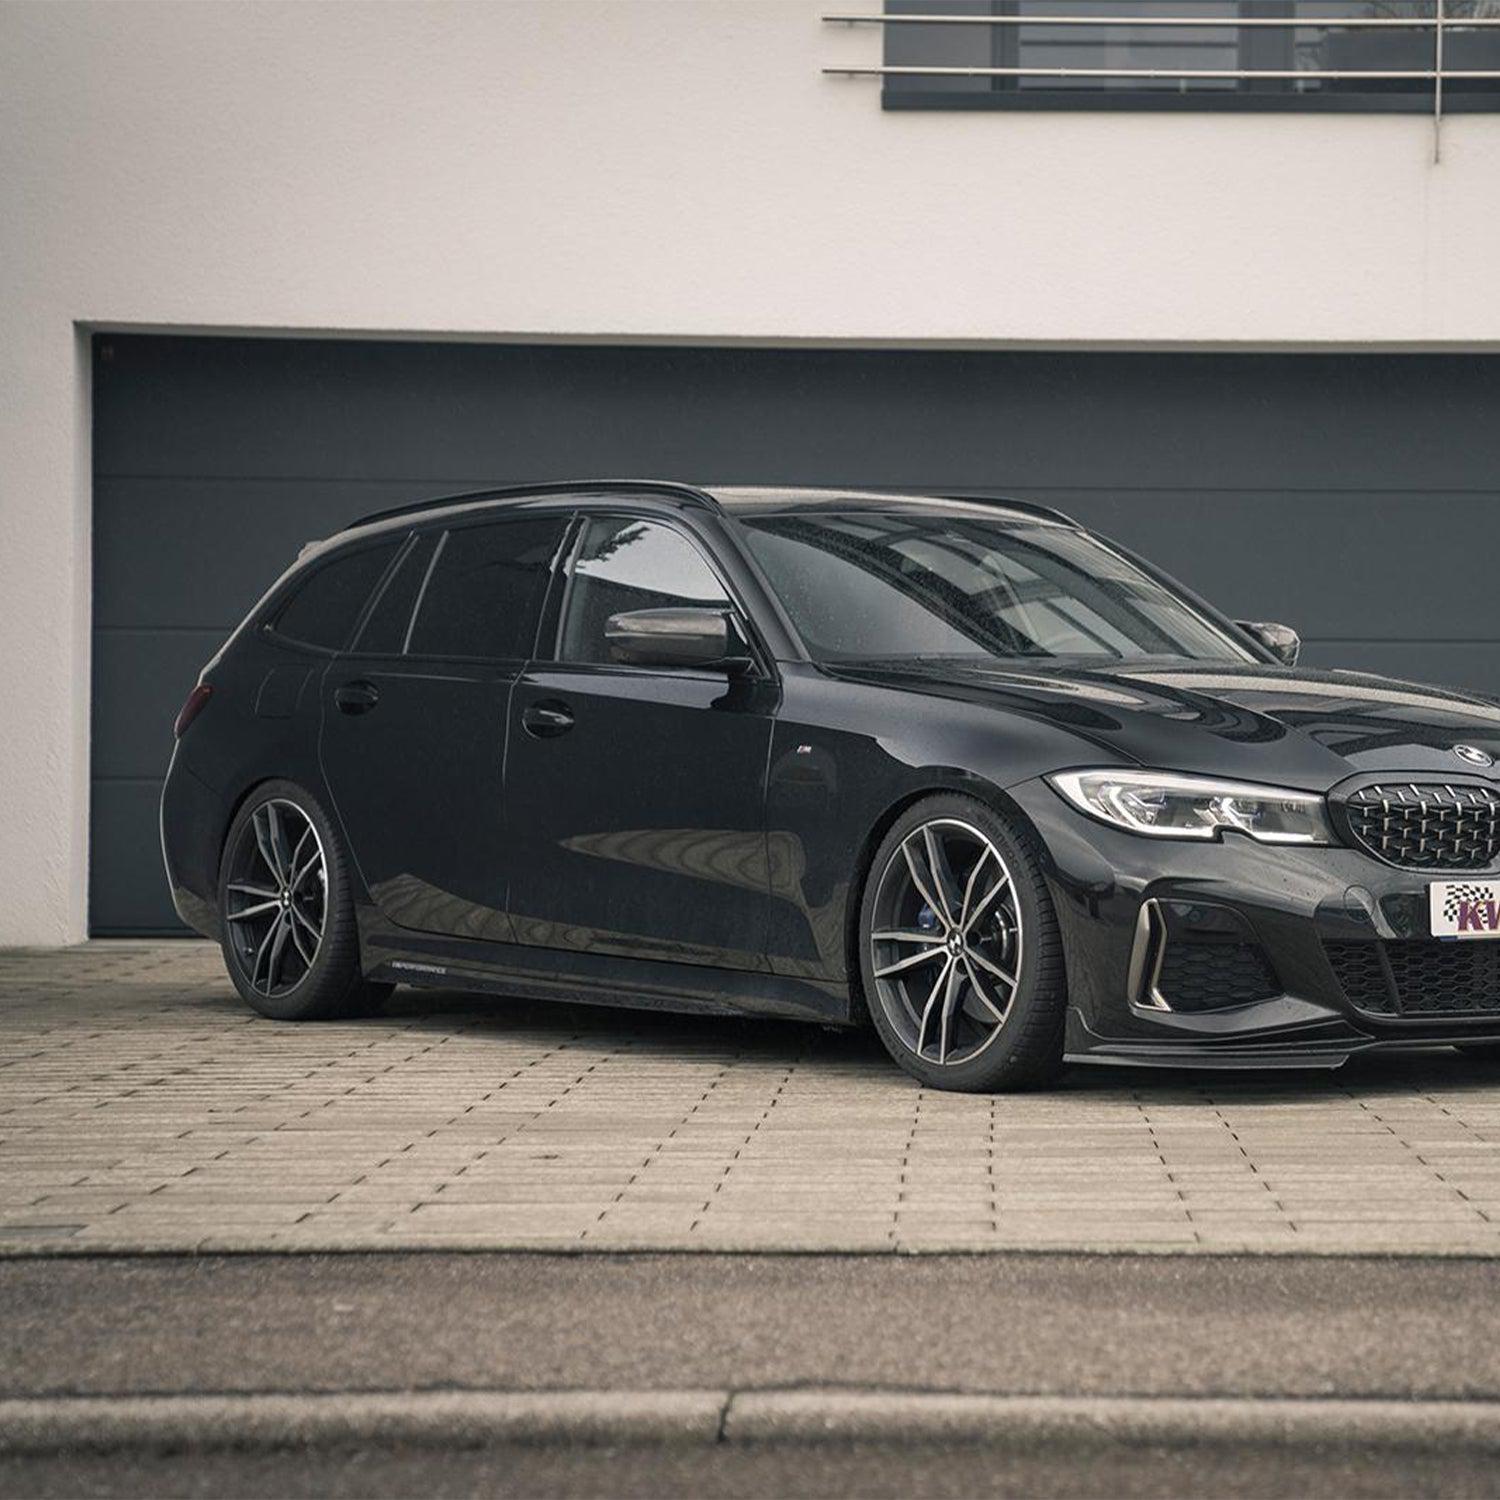 Luxury and Performance Combined - BMW G21 M340i xDrive